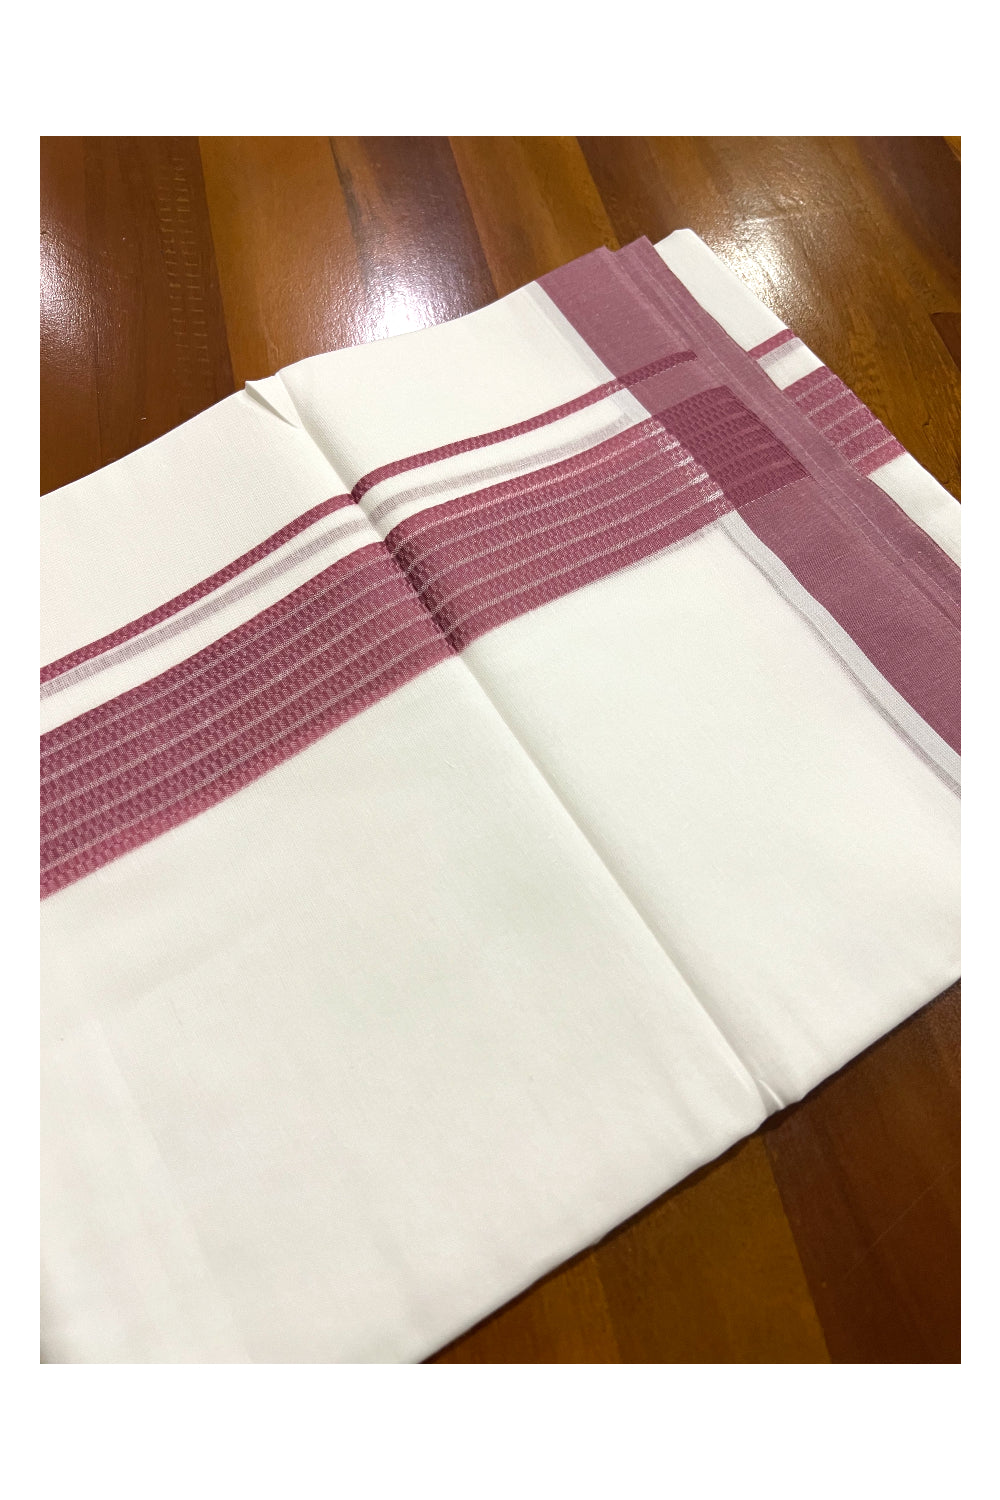 Pure White Cotton Double Mundu with Lines on Mauve Border (South Indian Dhoti)